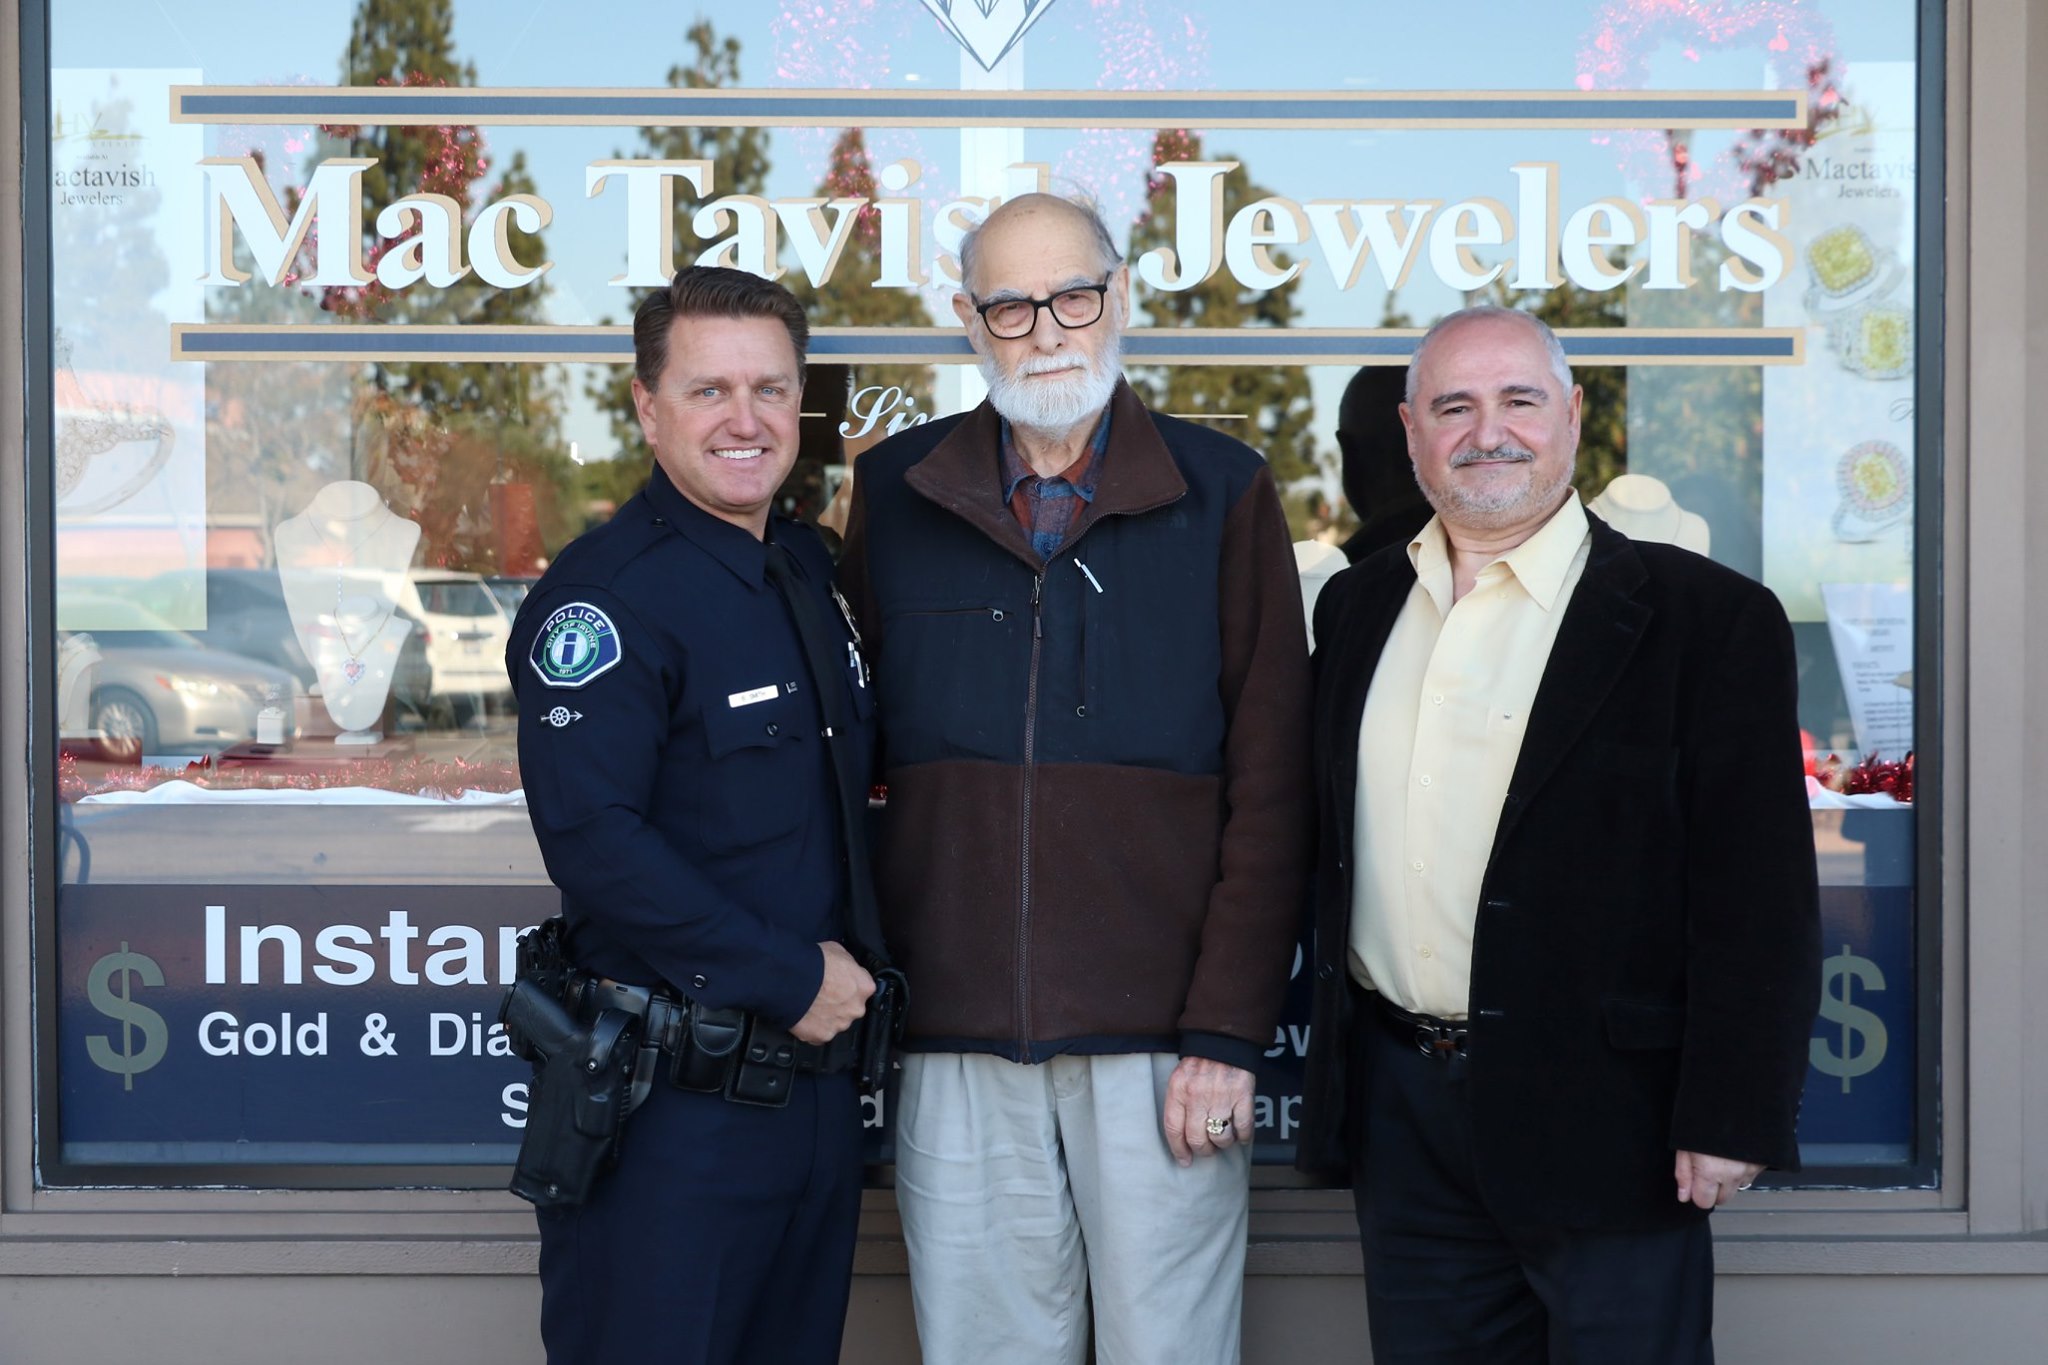 PHOTO: David Eaton got the surprise of his life from Irvine Police Officer Brian Smith and jeweler Harry Mardirossian after they worked for over a month to re-create his lost wedding ring and surprise him on Feb. 4, 2020.